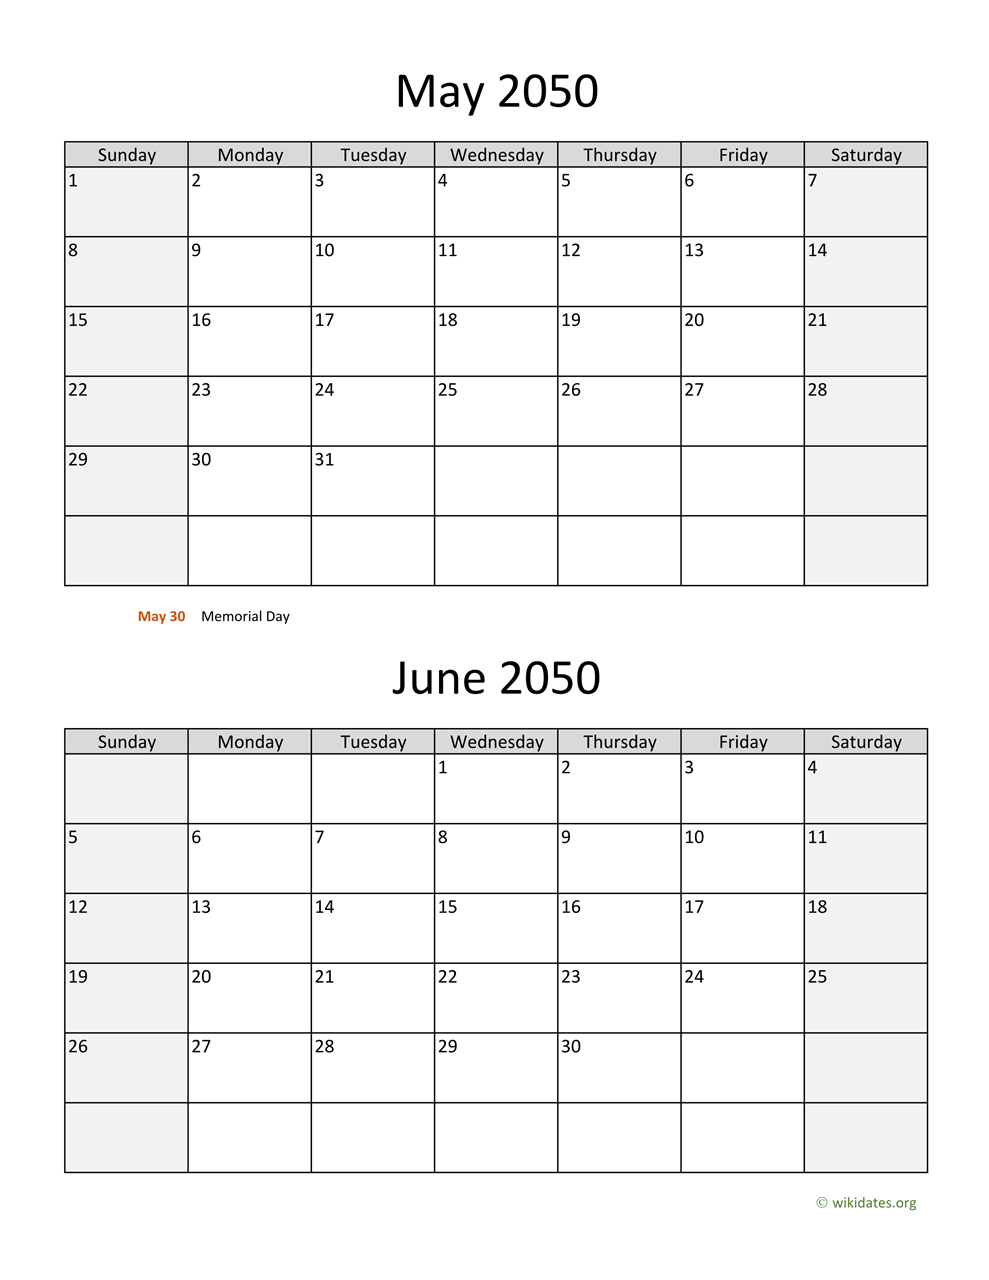 may-and-june-2050-calendar-wikidates